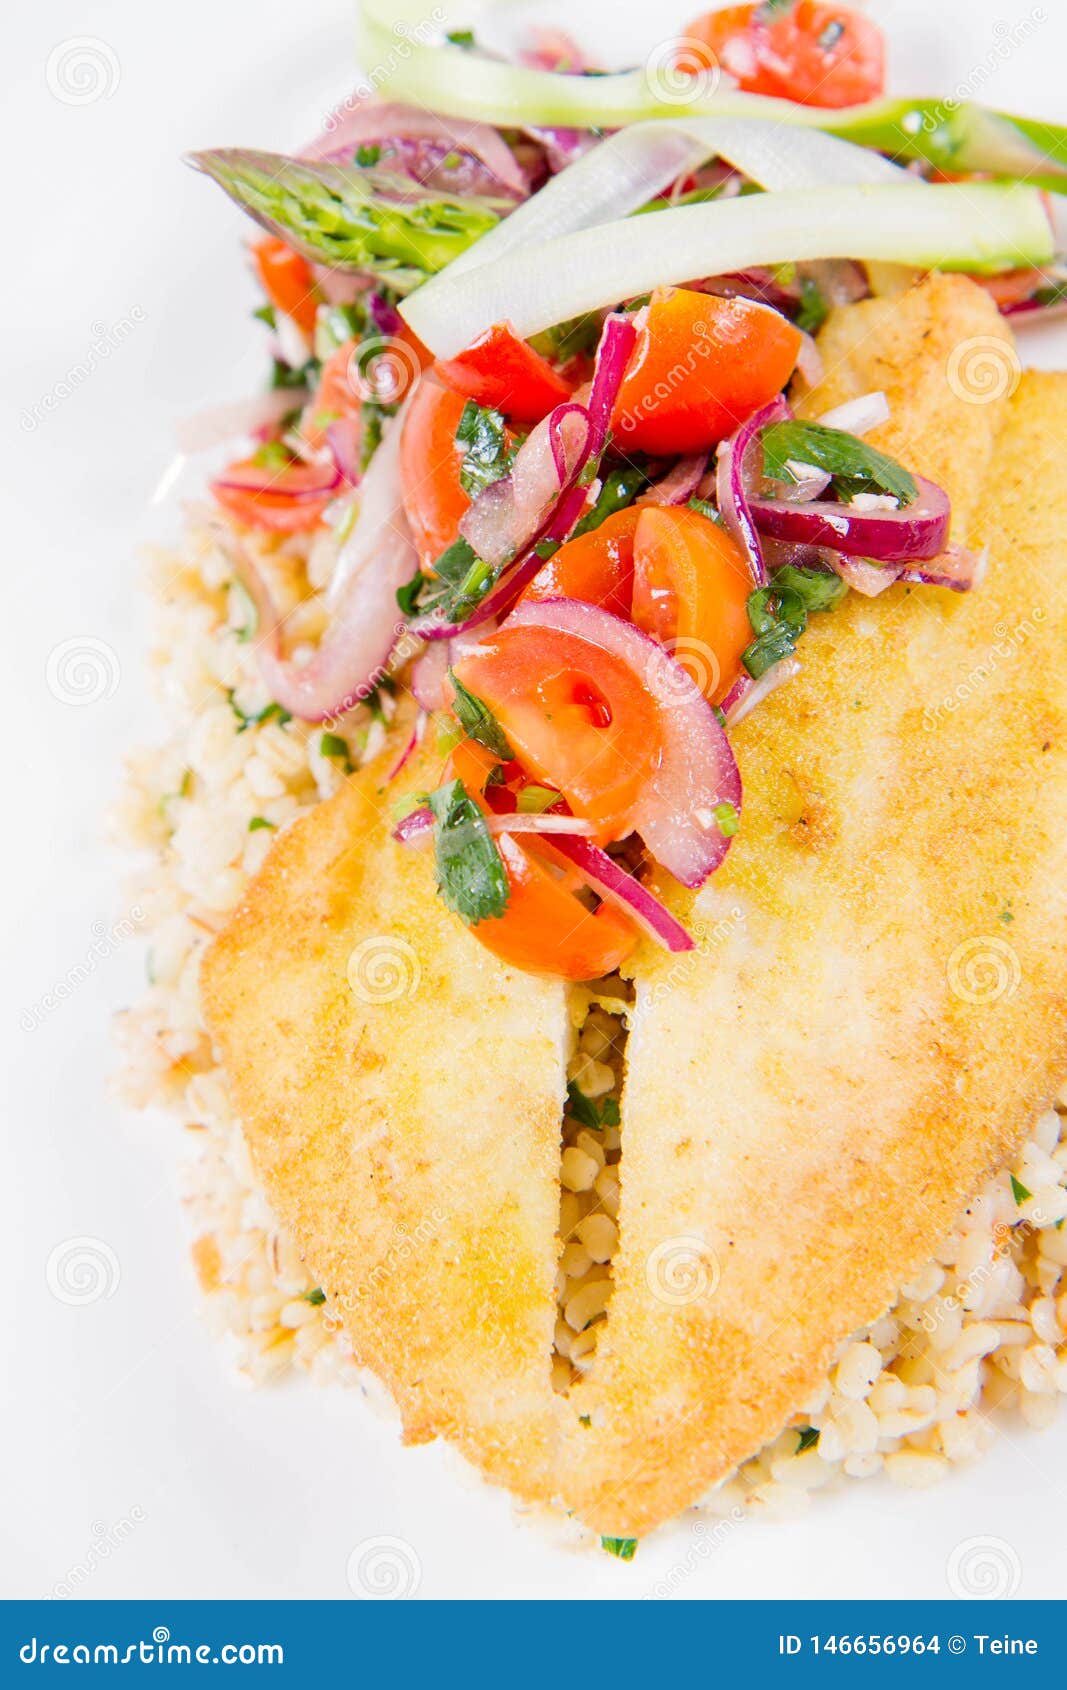 Fried dory fish fillet stock photo. Image of dinner - 146656964